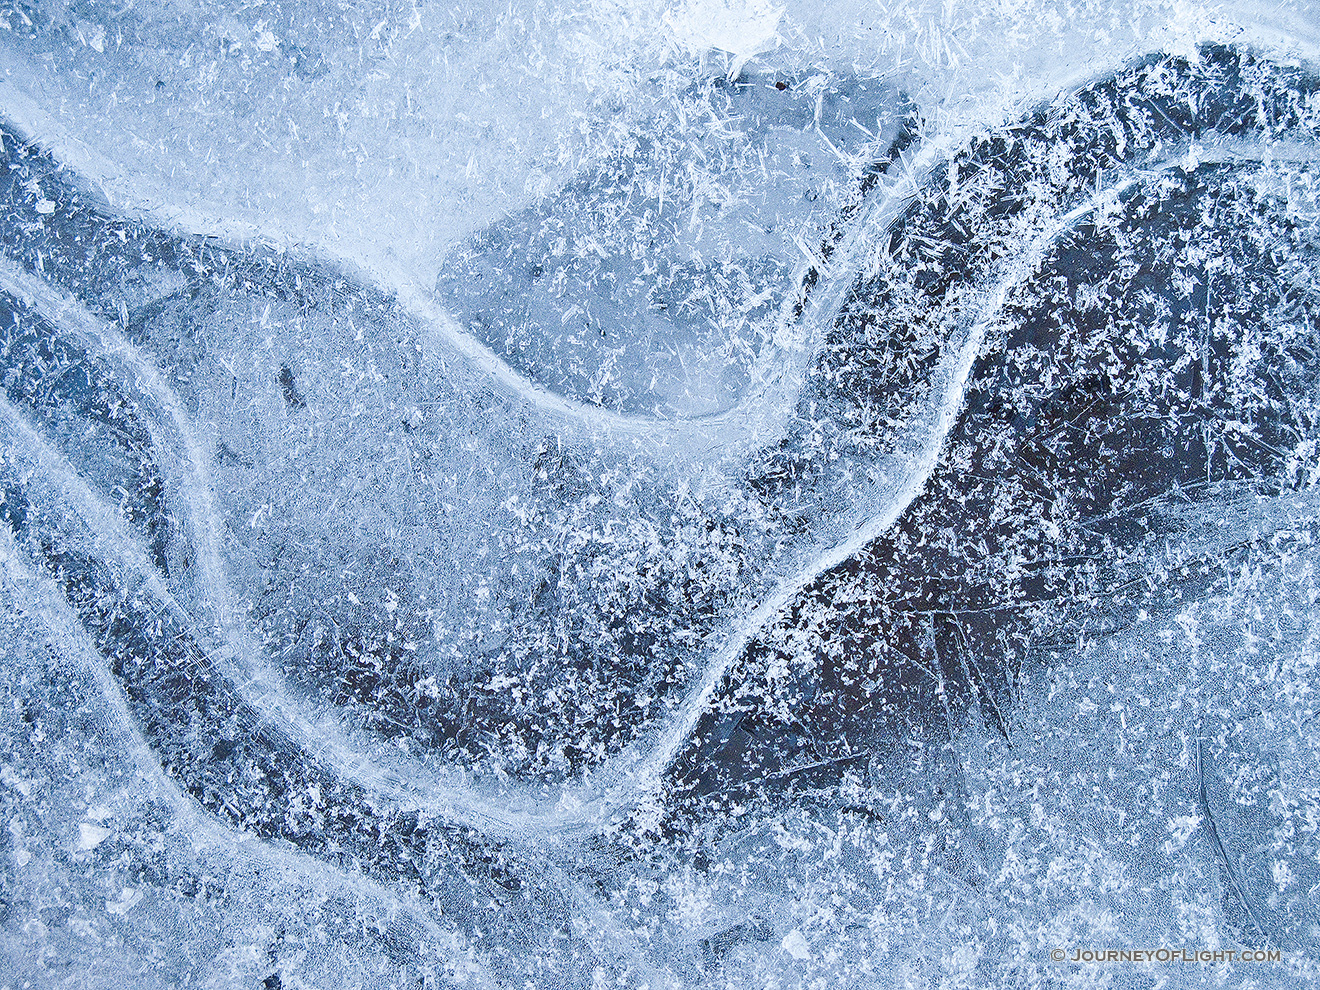 Bubbles and lines form an abstract pattern in the frozen ice in Stone Creek at Platte River State Park. - Platte River SP Picture